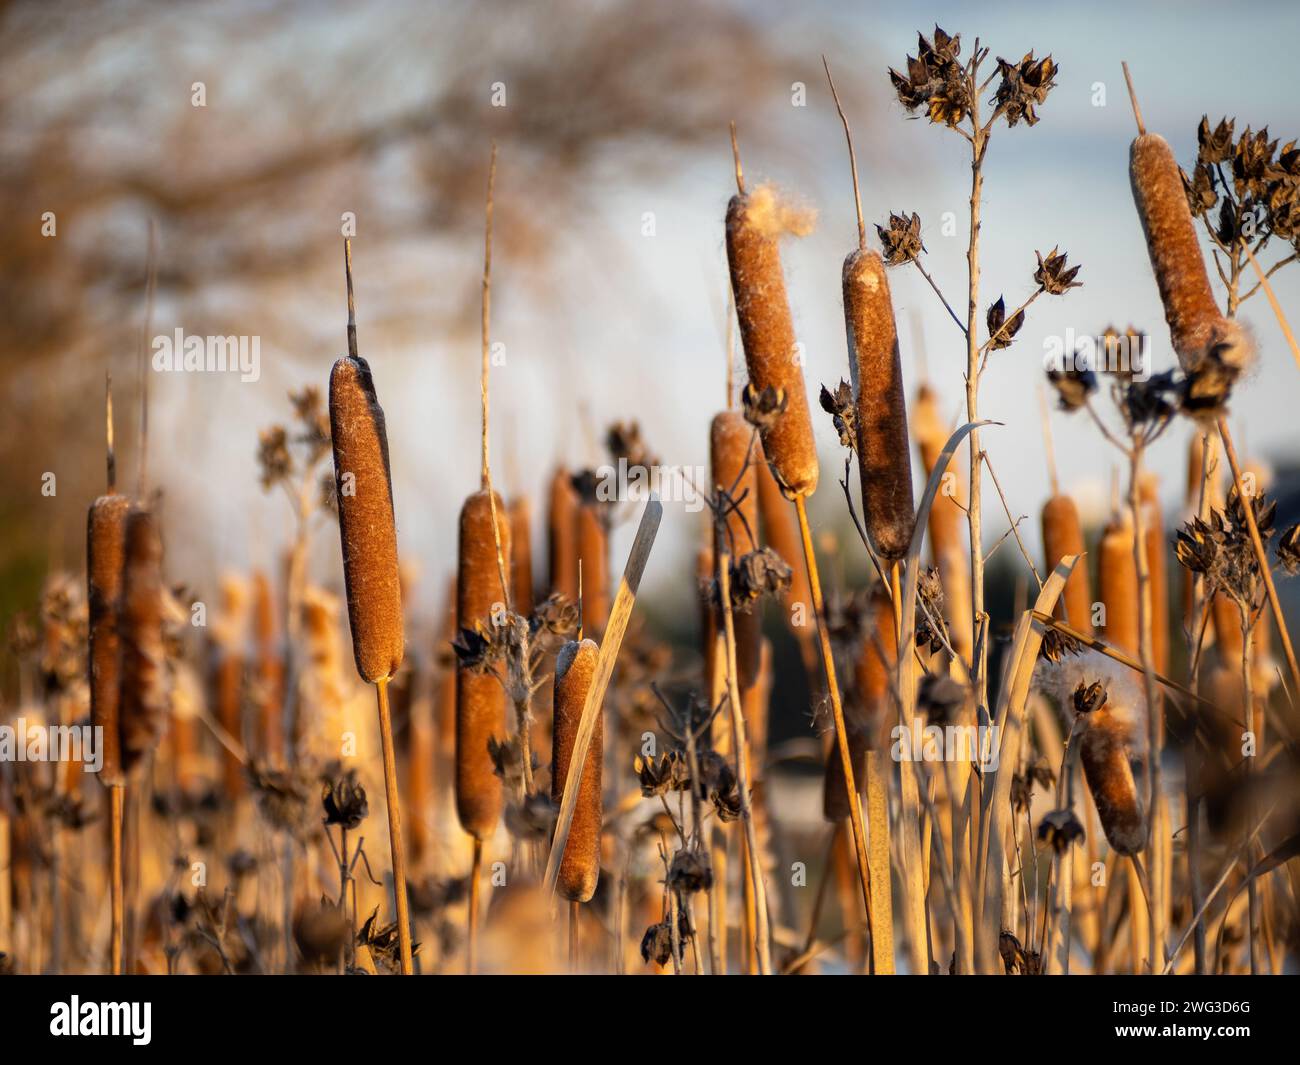 Cattail or bulrush, bathed in golden sunlight, graces the water’s edge. Stock Photo